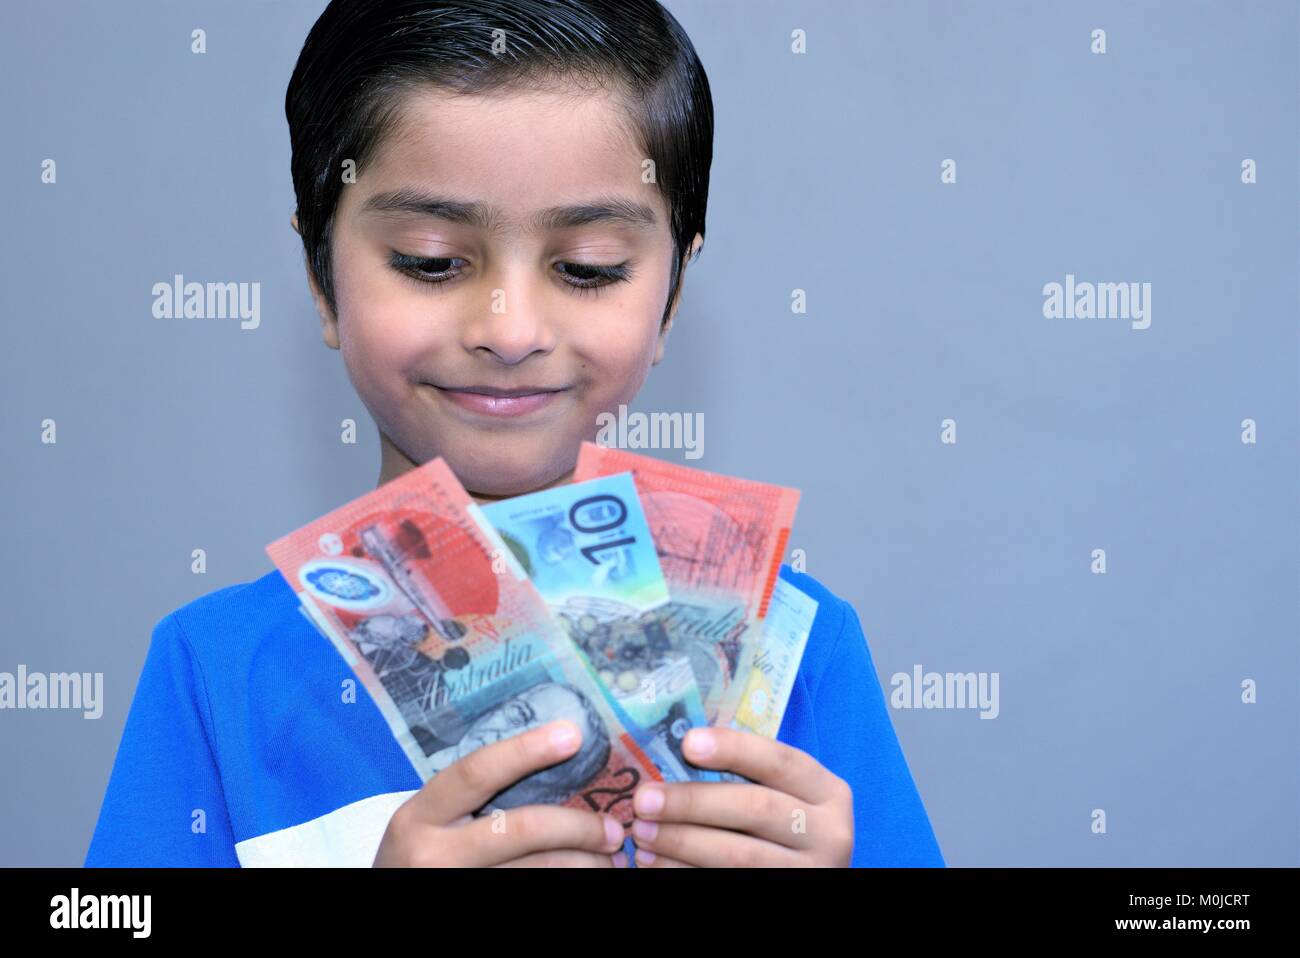 Cheerful kid holding money. Australian dollars in hands of happy child. Concept of pocket money. Excited child with money. Stock Photo